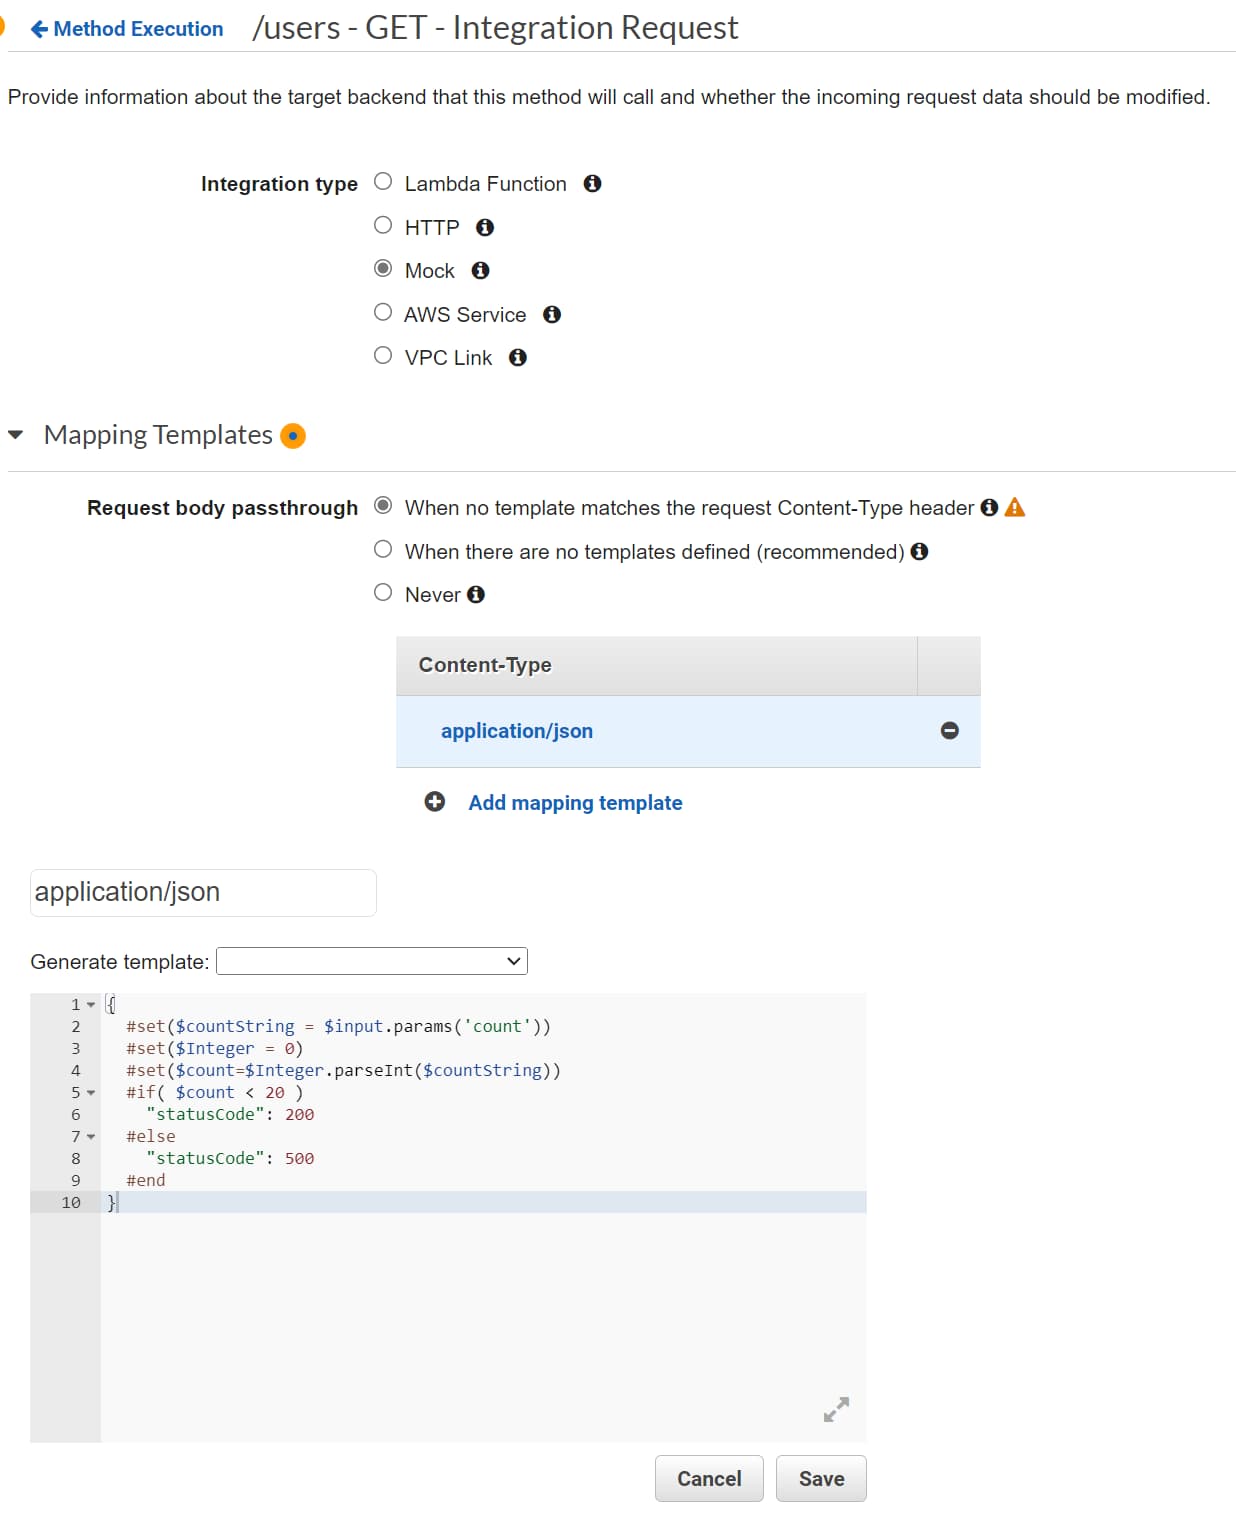 Integration Request using VTL mapping template for a mock integration in Amazon API Gateway REST API.